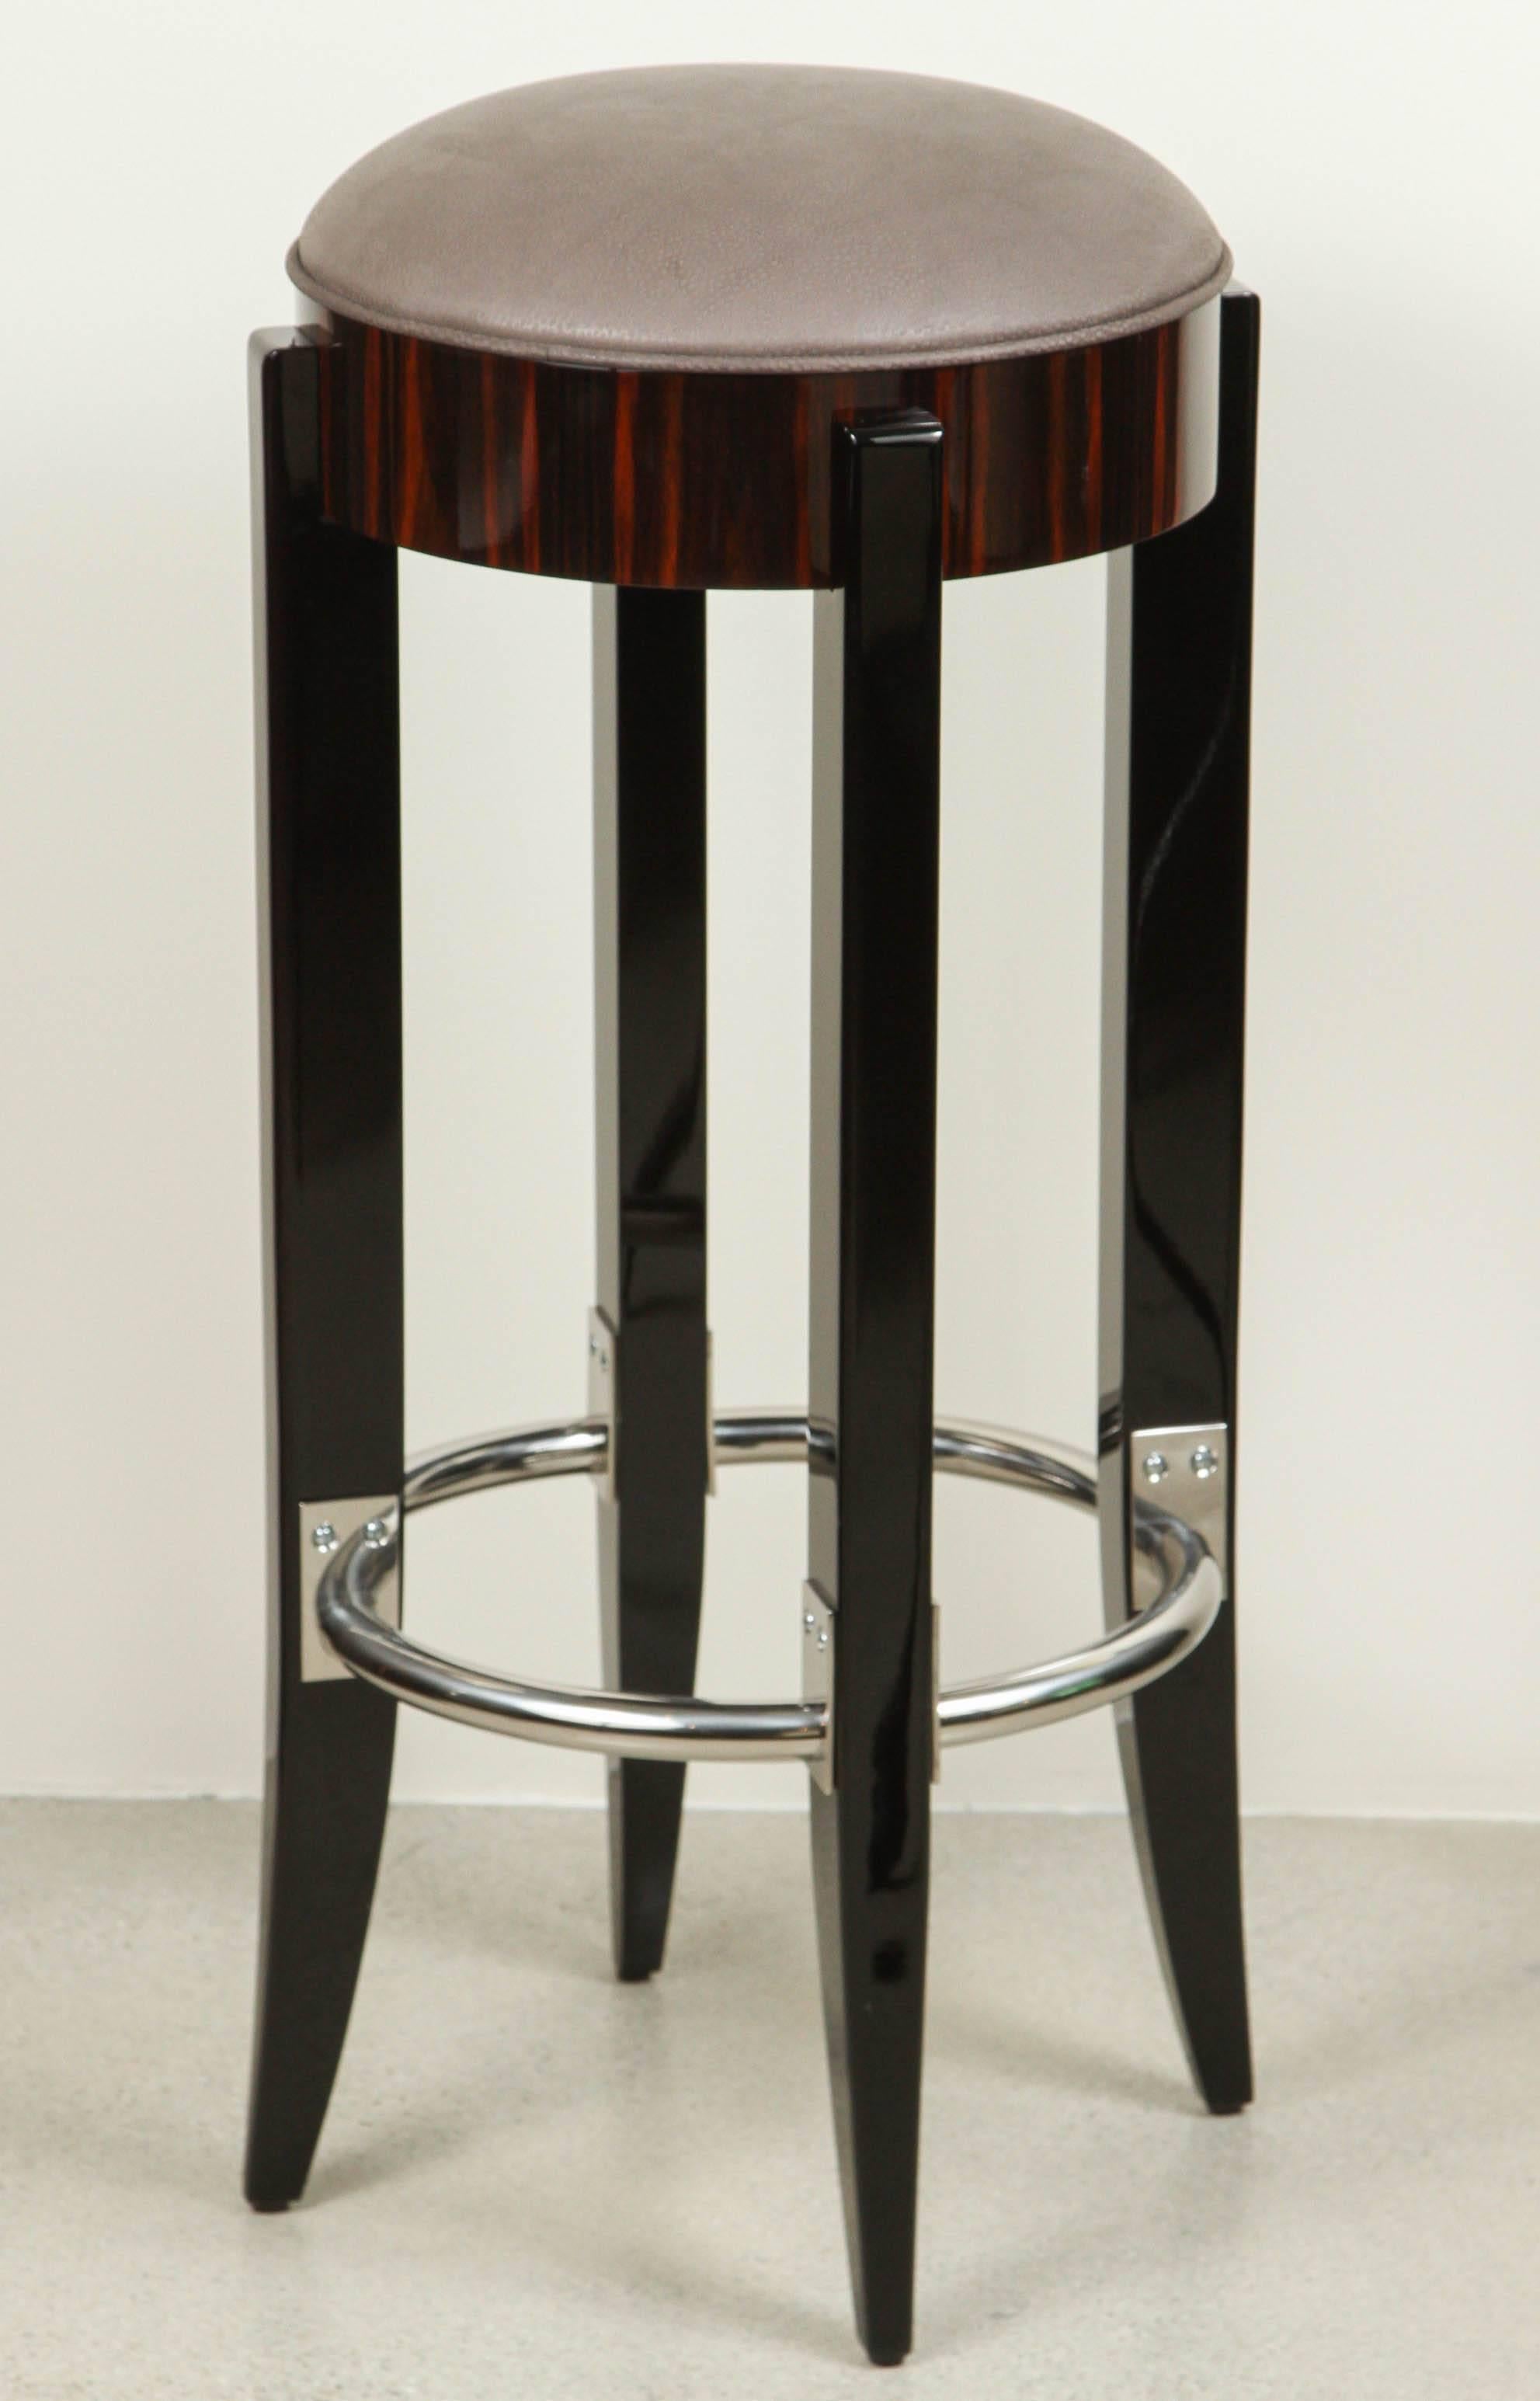 Fine German furniture maker, Cygal Art Deco, reinvents an old and proven Classic piece after Jacques Emile Ruhlmann design. It stands on solid timber legs in black high gloss, in contrast to the Macassar seat. This comfortable bar stool is